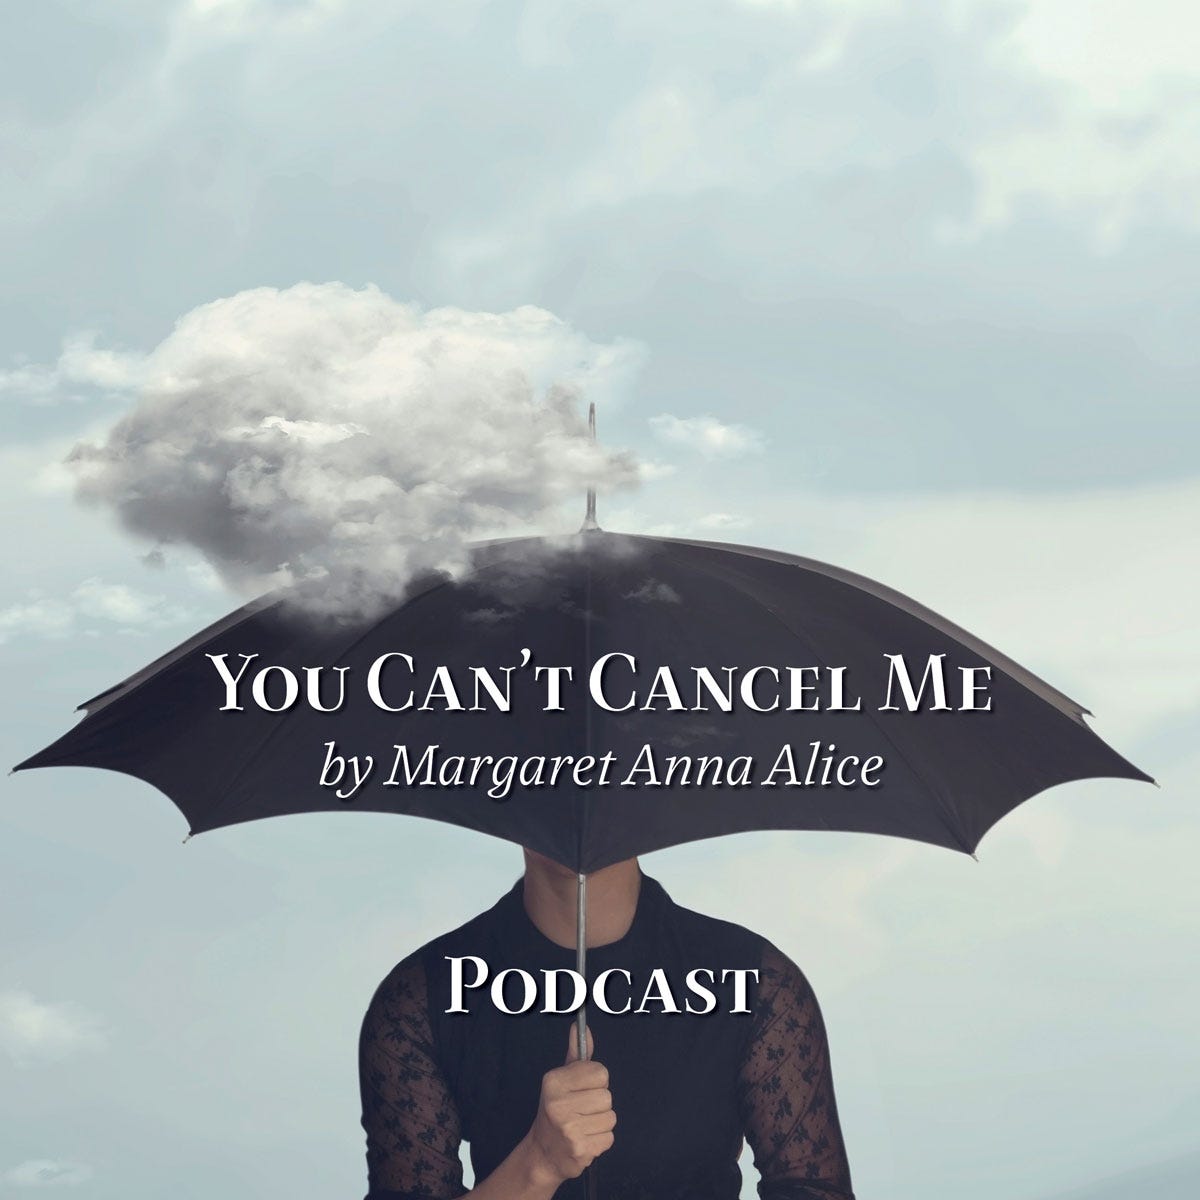 You Can't Cancel Me: Woman in Black Holding Umbrella with Floating Cloud Above